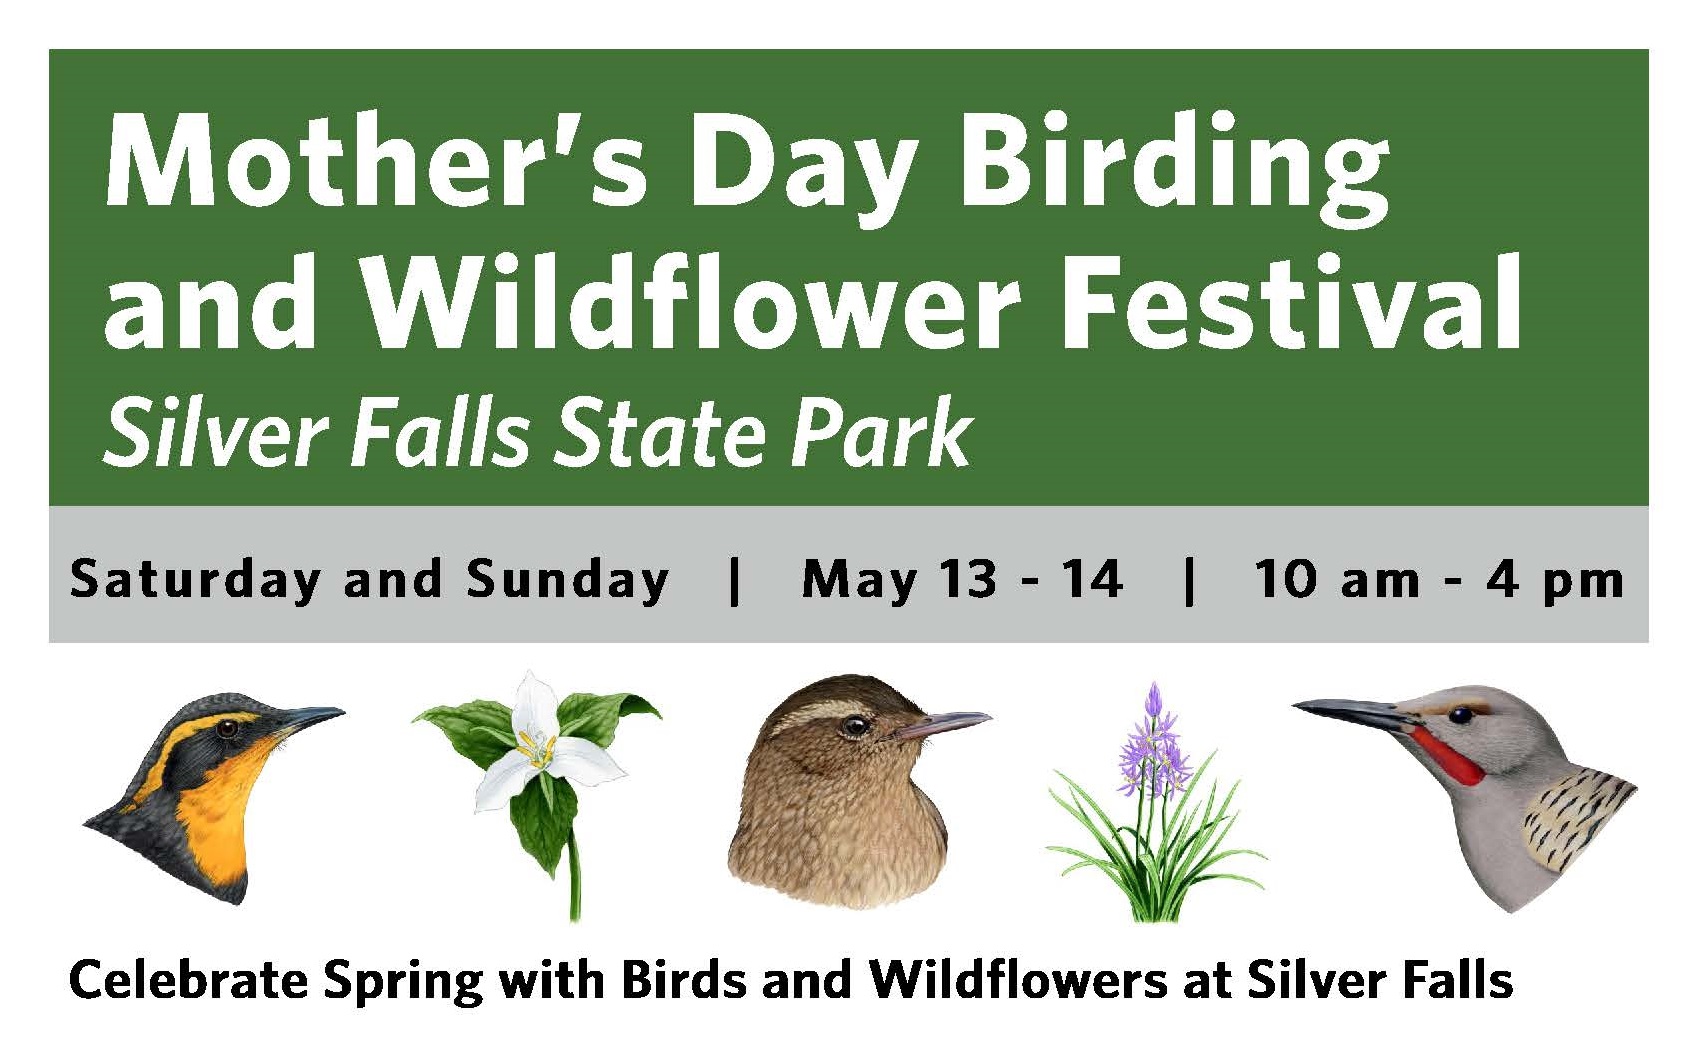 green banner with title Mother's Day Birding and Wildflower Festival Silver Falls State Park Saturday and Sunday May 13-14 10 am - 4 pm Celebrate Spring with Birds and Wildflowers at Silver Falls. with Camas, Trillium, and three bird heads as illustrations